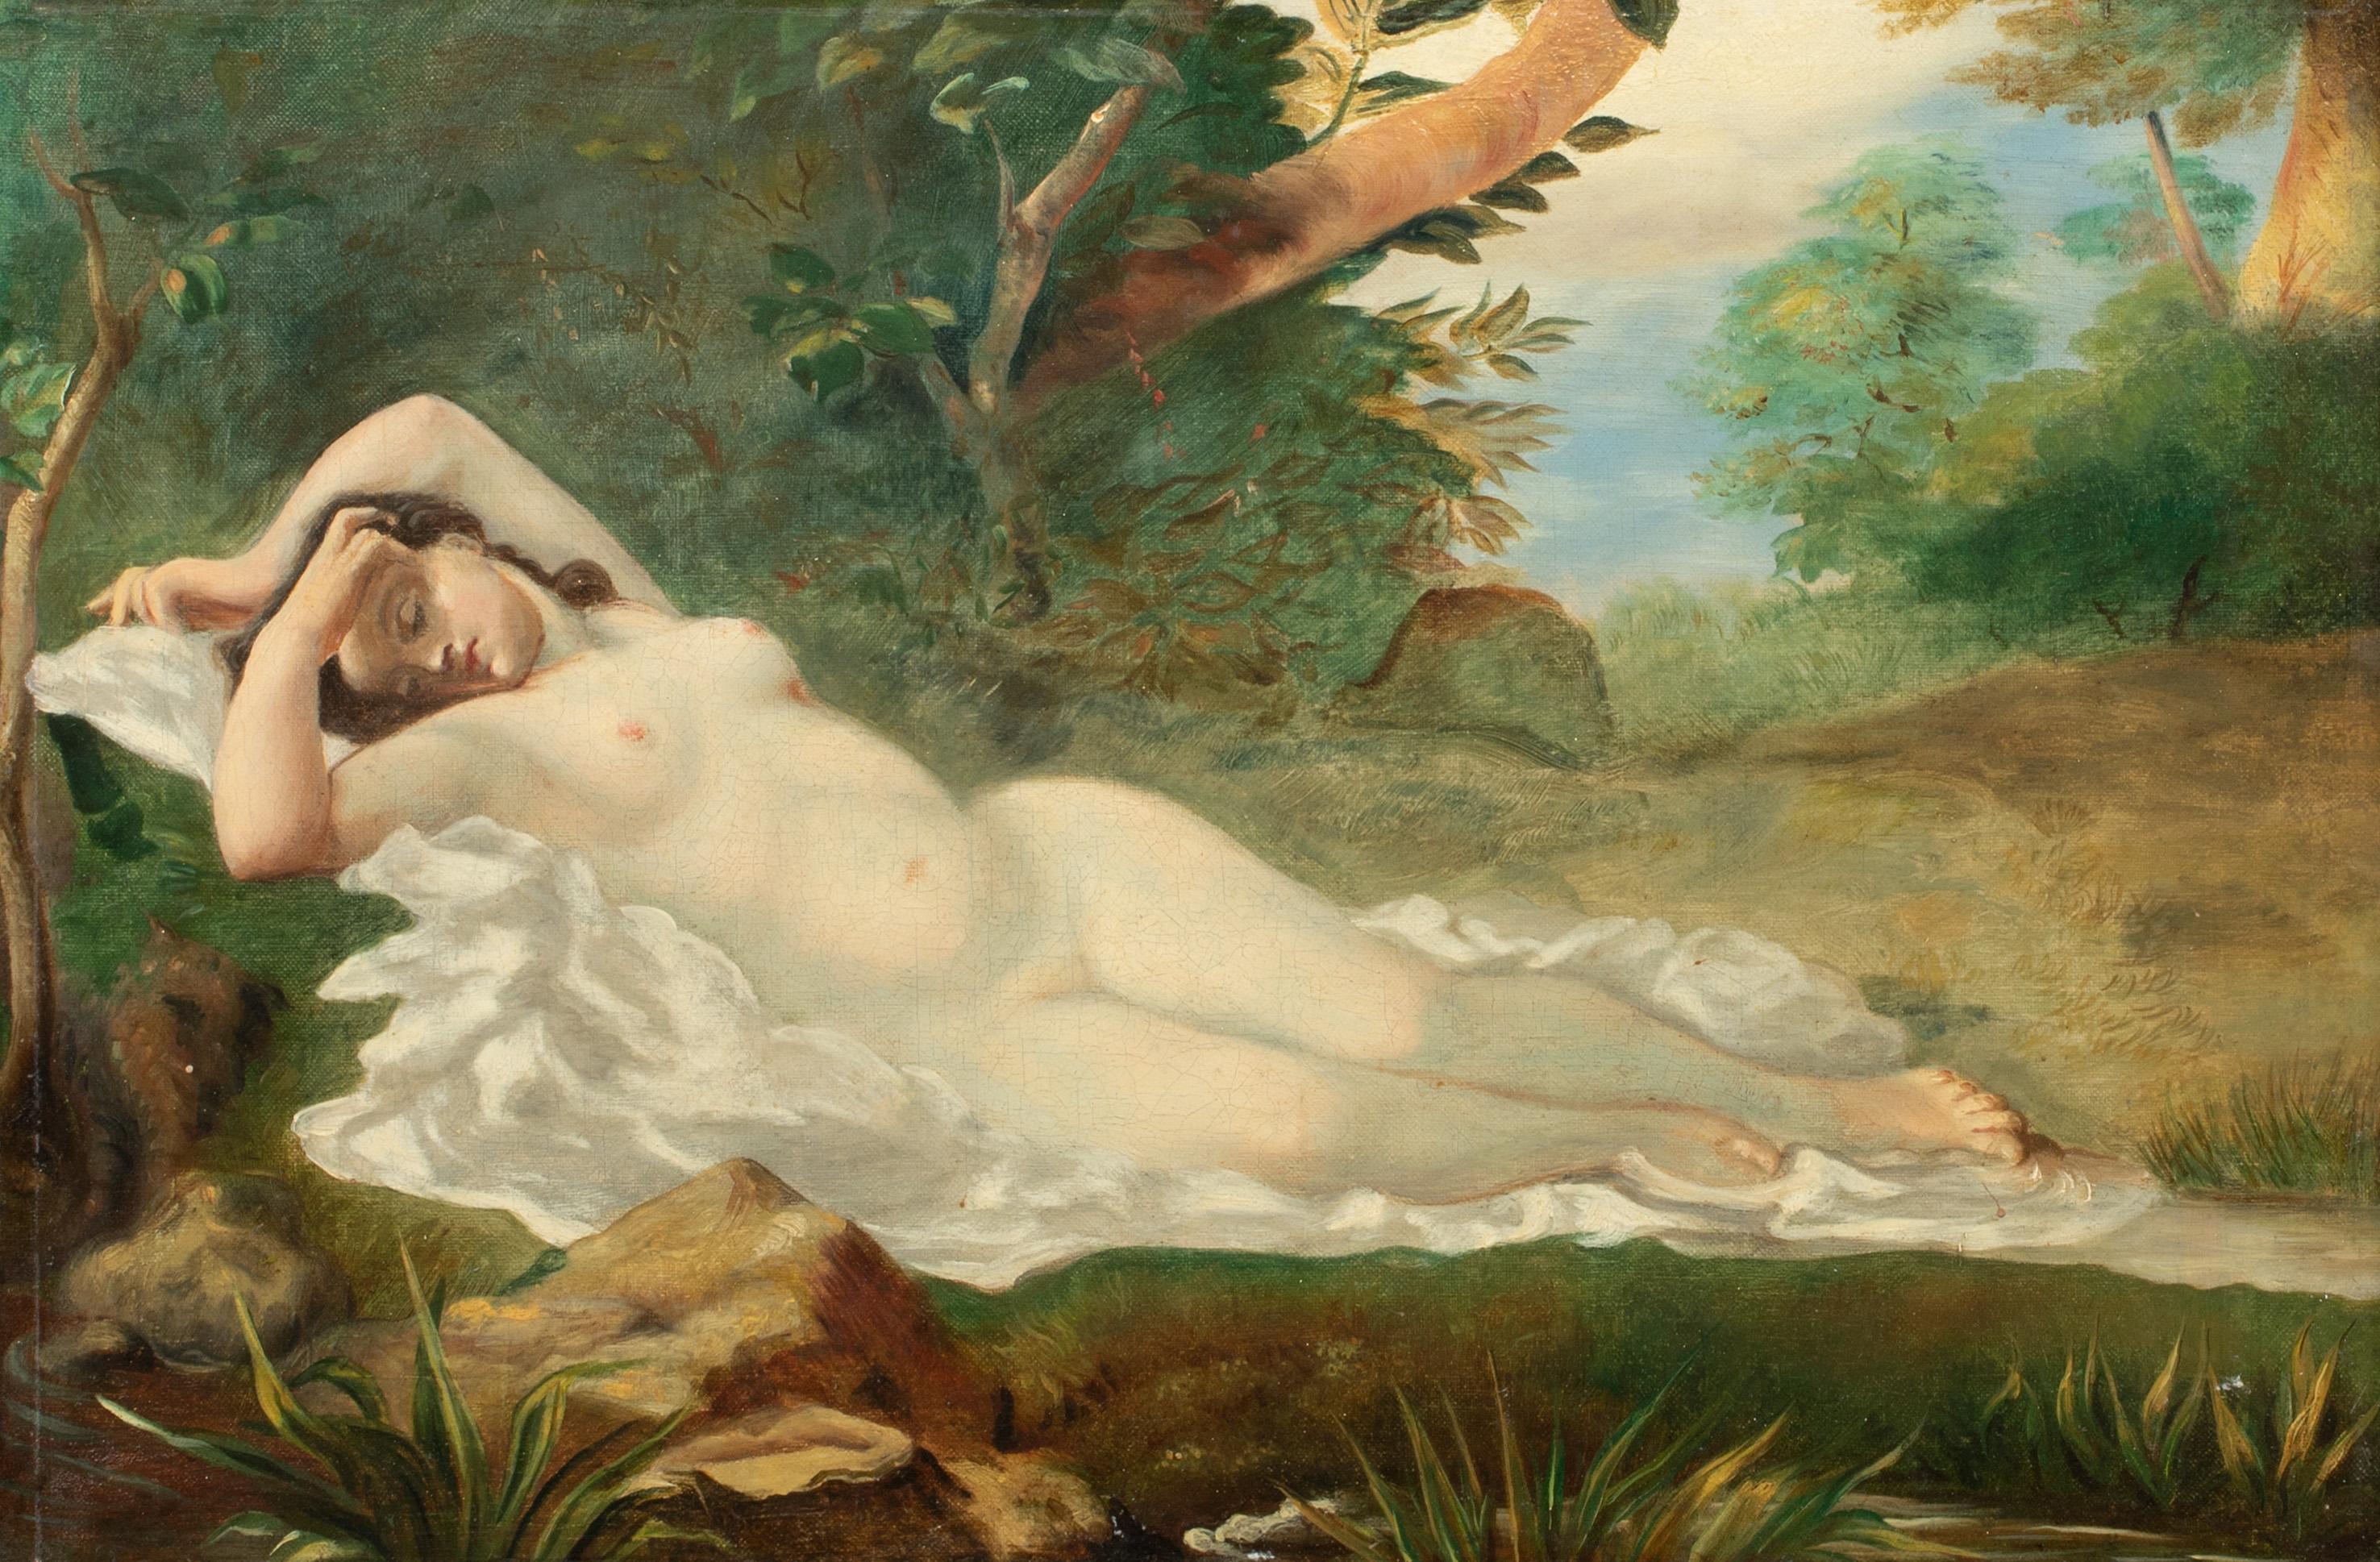 Nude Sleeping In The Forest, 19th century 

French Classical School

Large 19th Century French Nude sleeping in a forest, oil on canvas. Excellent quality and condition full length scene of a young nude asleep on a woodland clearing. Presented in a